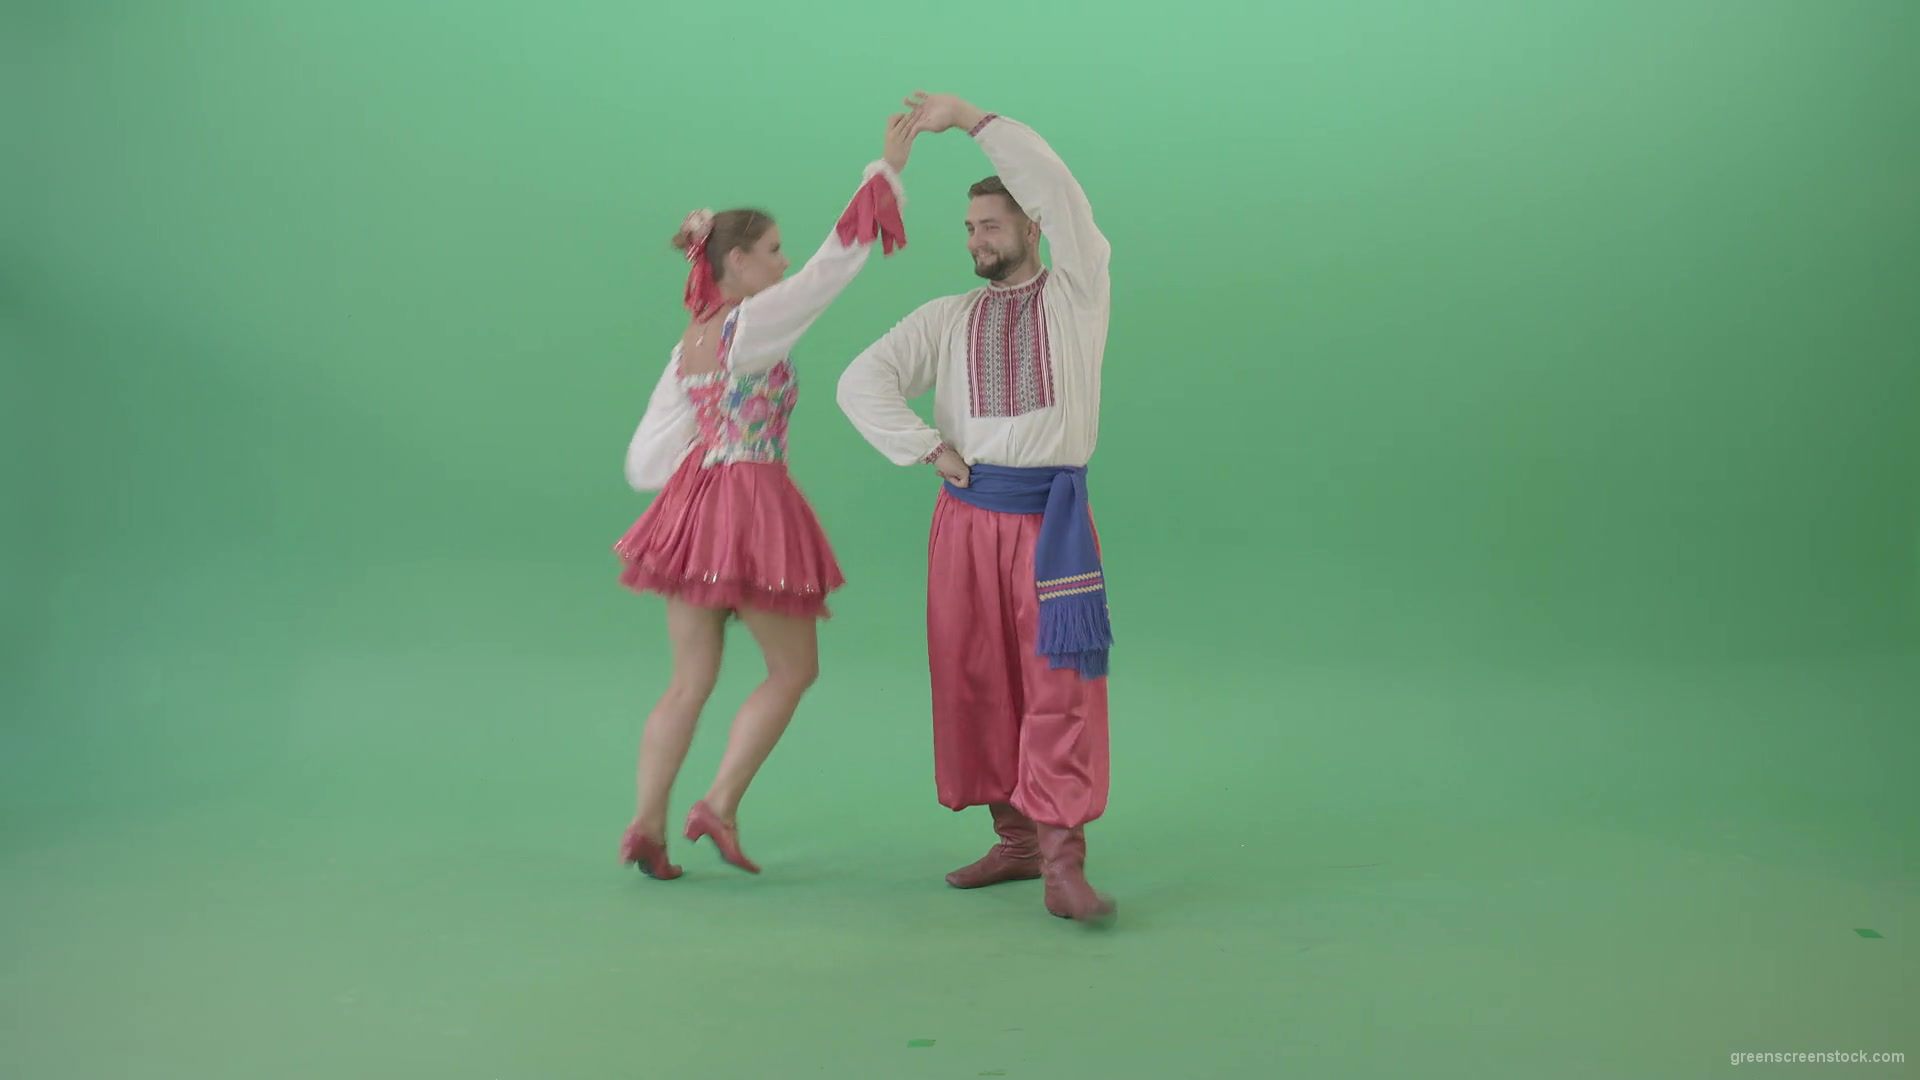 Folk-ethno-ukraine-dancing-boy-and-girl-isolated-on-green-screen-30-fps-4K-Video-Footage-1920_002 Green Screen Stock